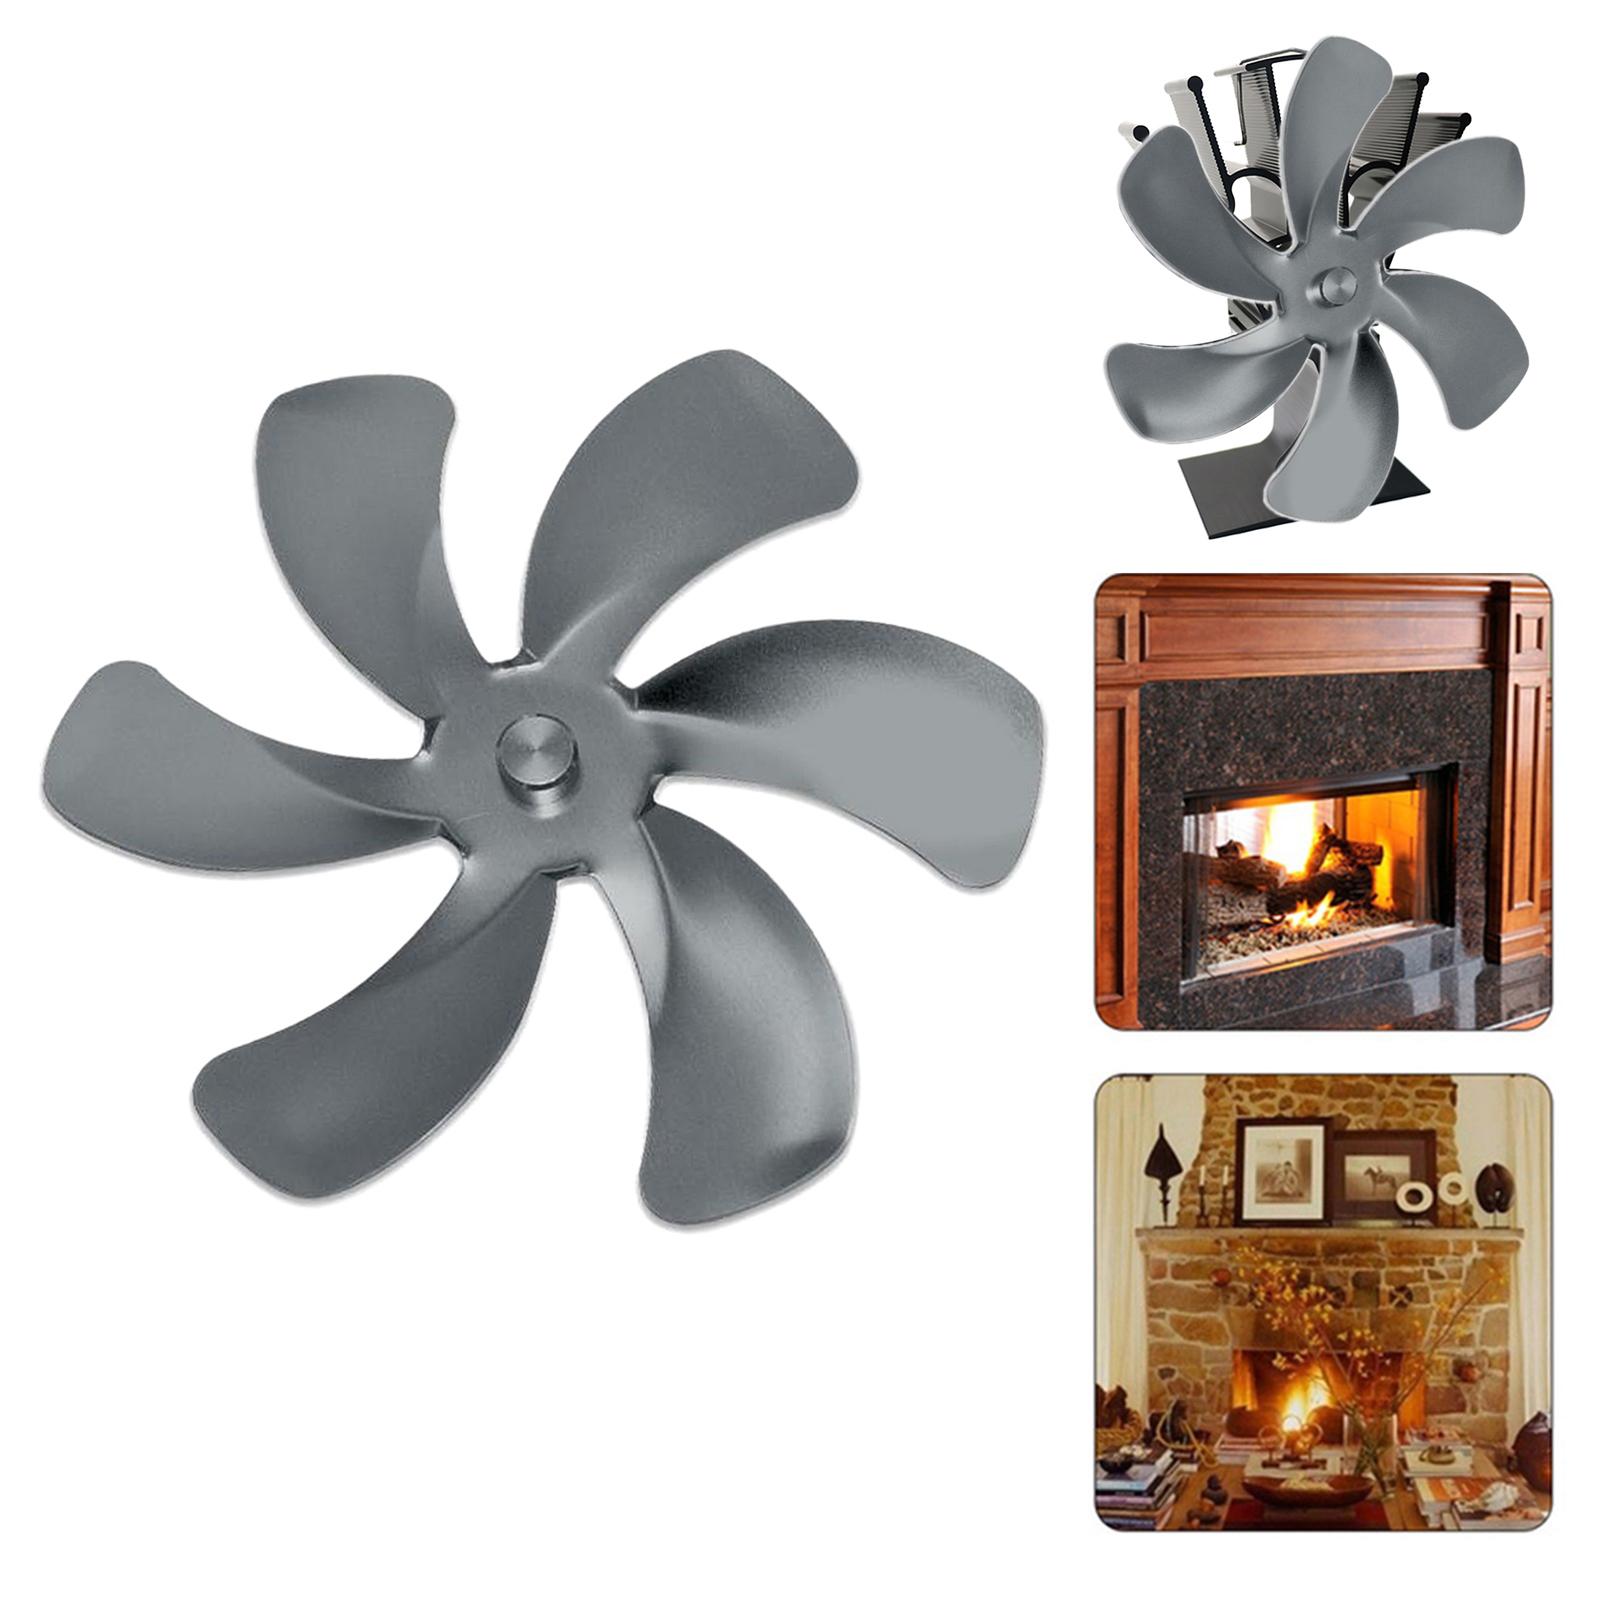 Universal Fireplace Fan Replacement Blades 6-Blade Burning Fan Blades Gray